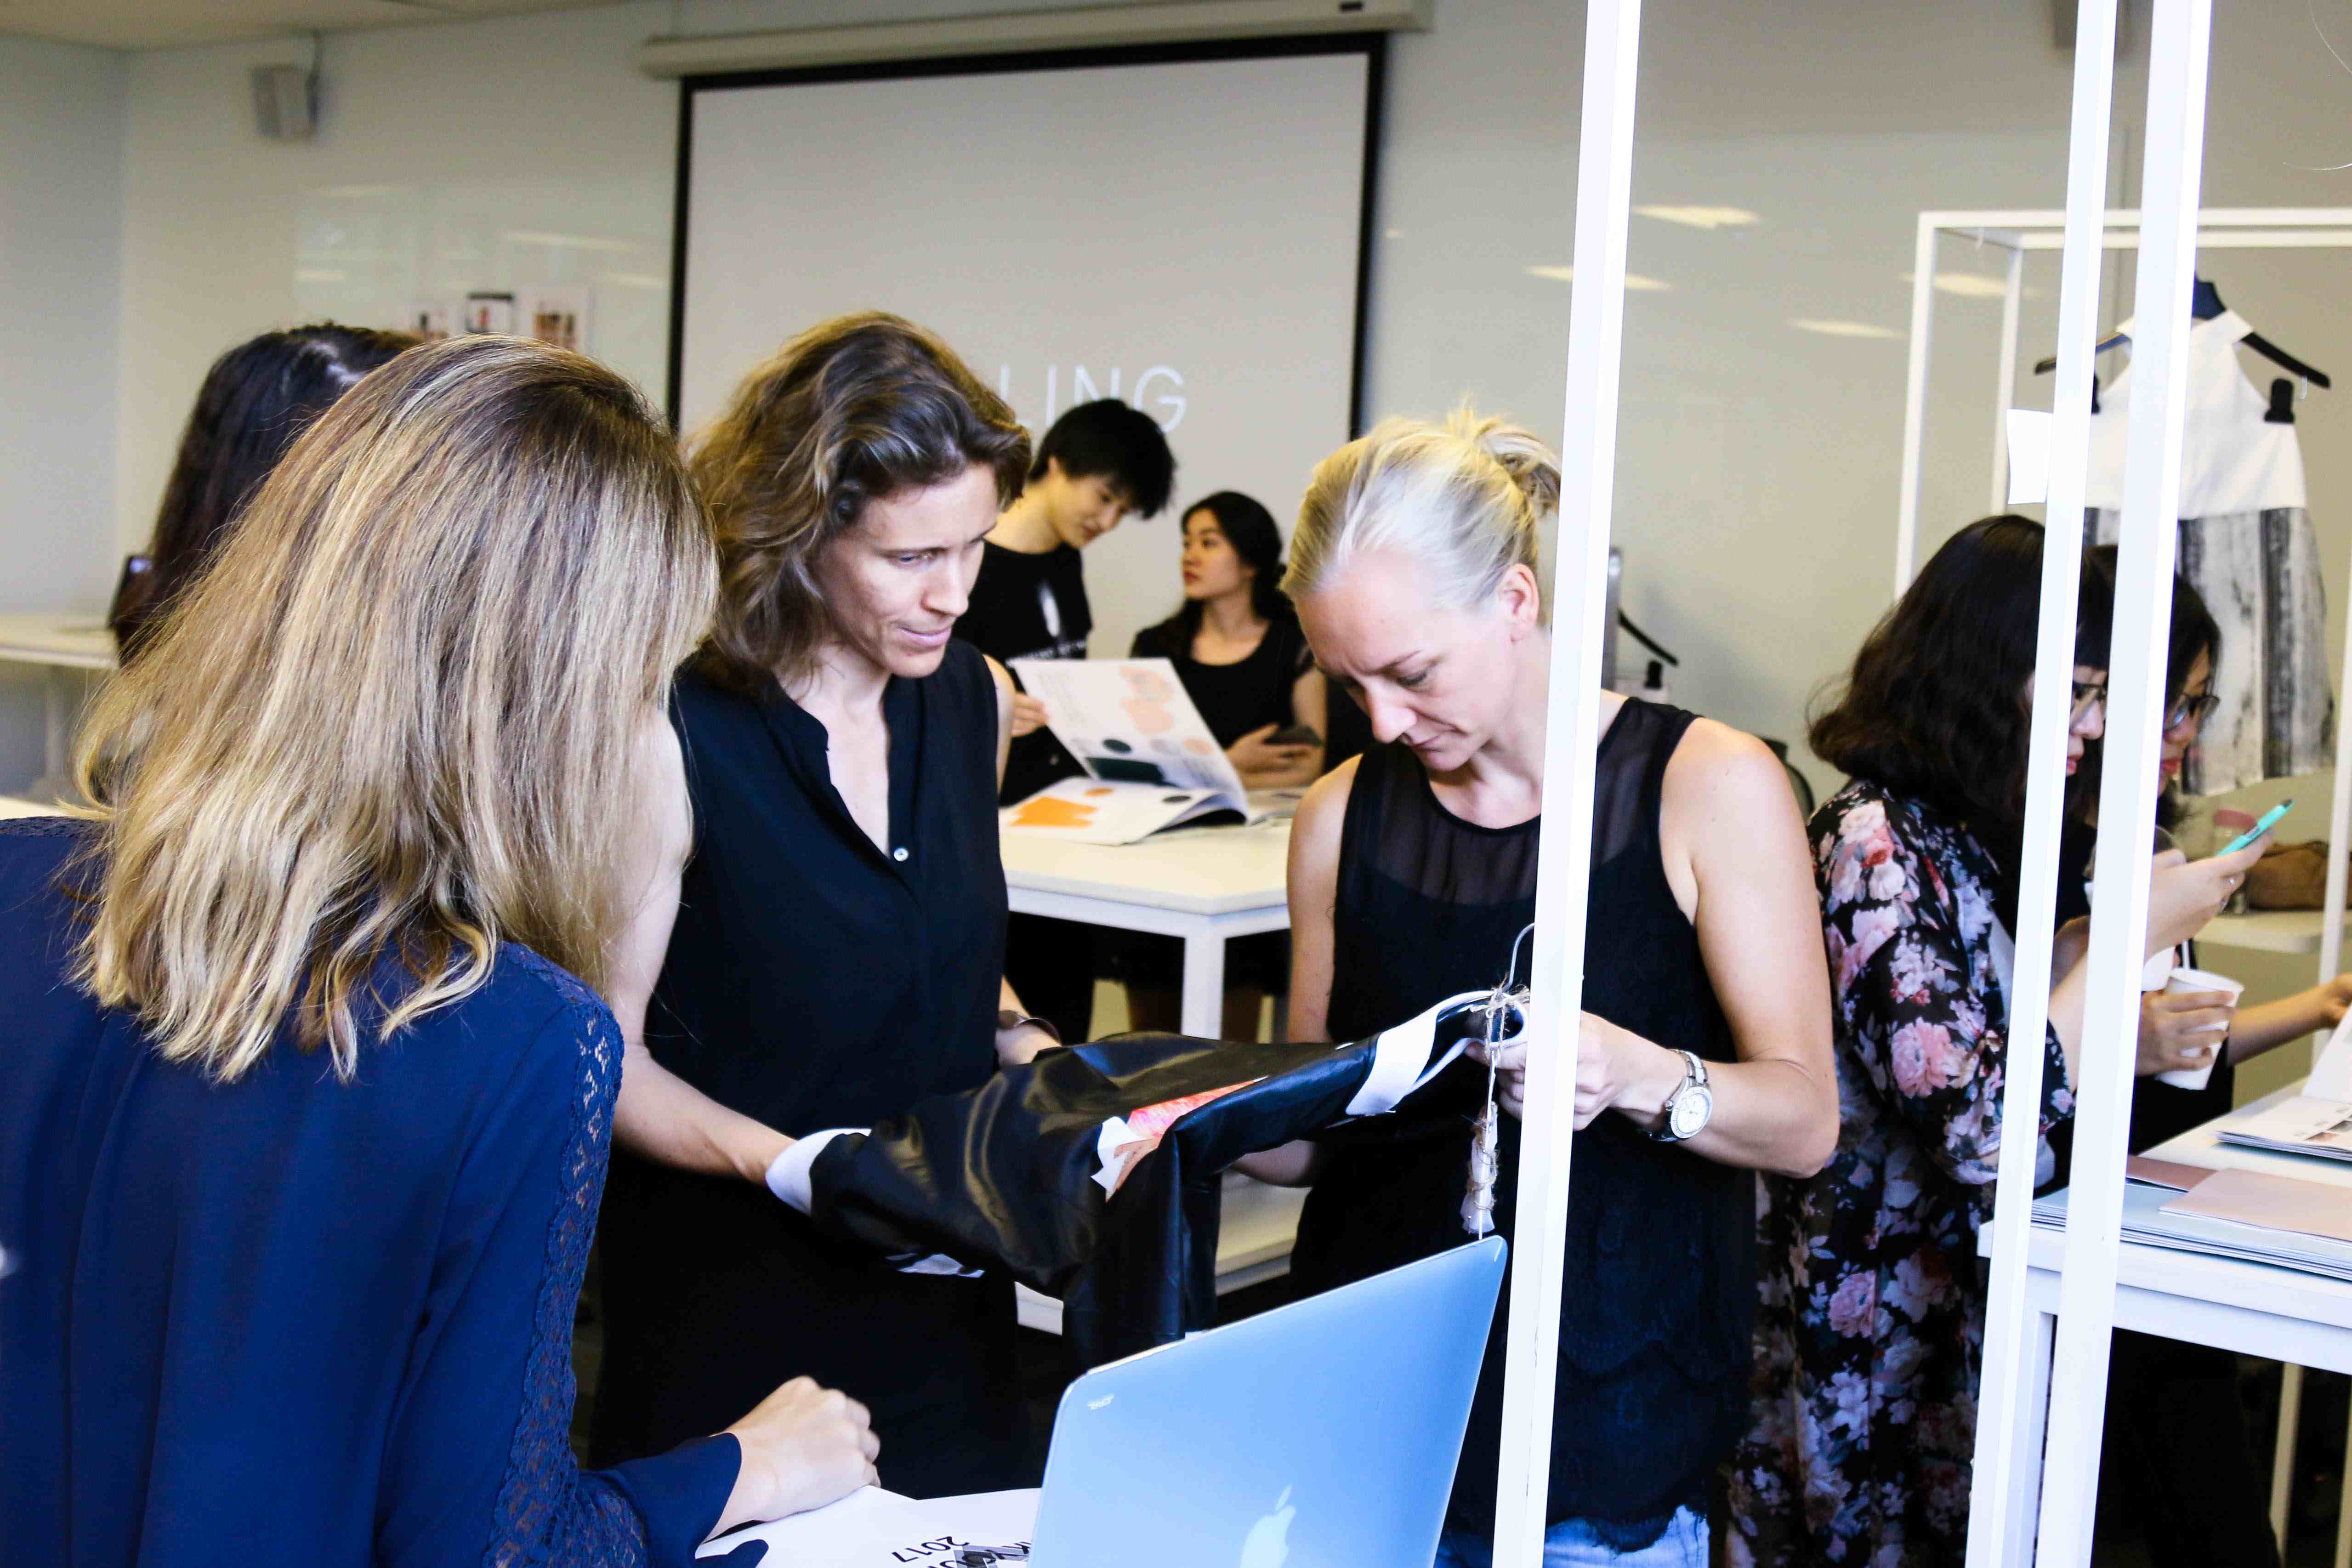 The students and the Mark Your Wall team discuss the fashion garments that embrace the startup’s artworks. The collaboration was introduced in the ‘Product Development' course as a work-integrated learning project.